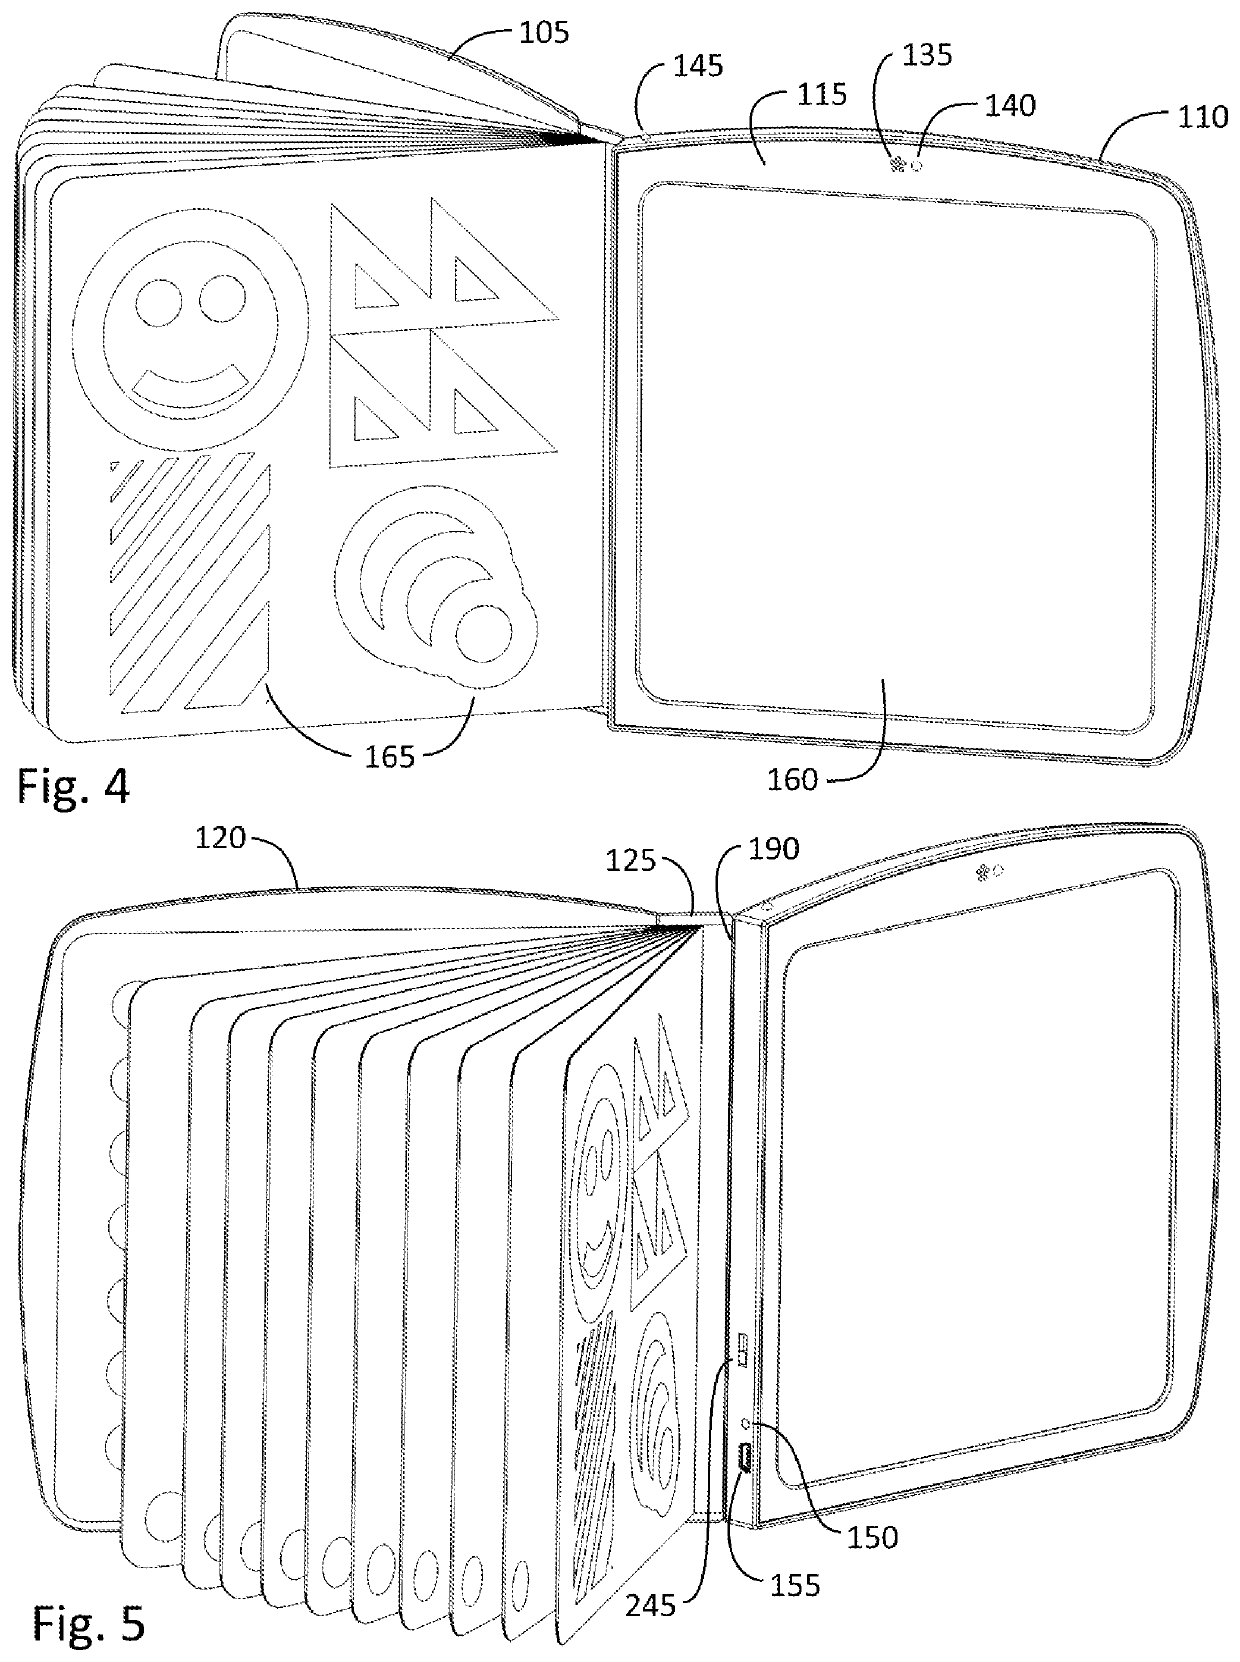 Medical care education emotional support, and development assistance device